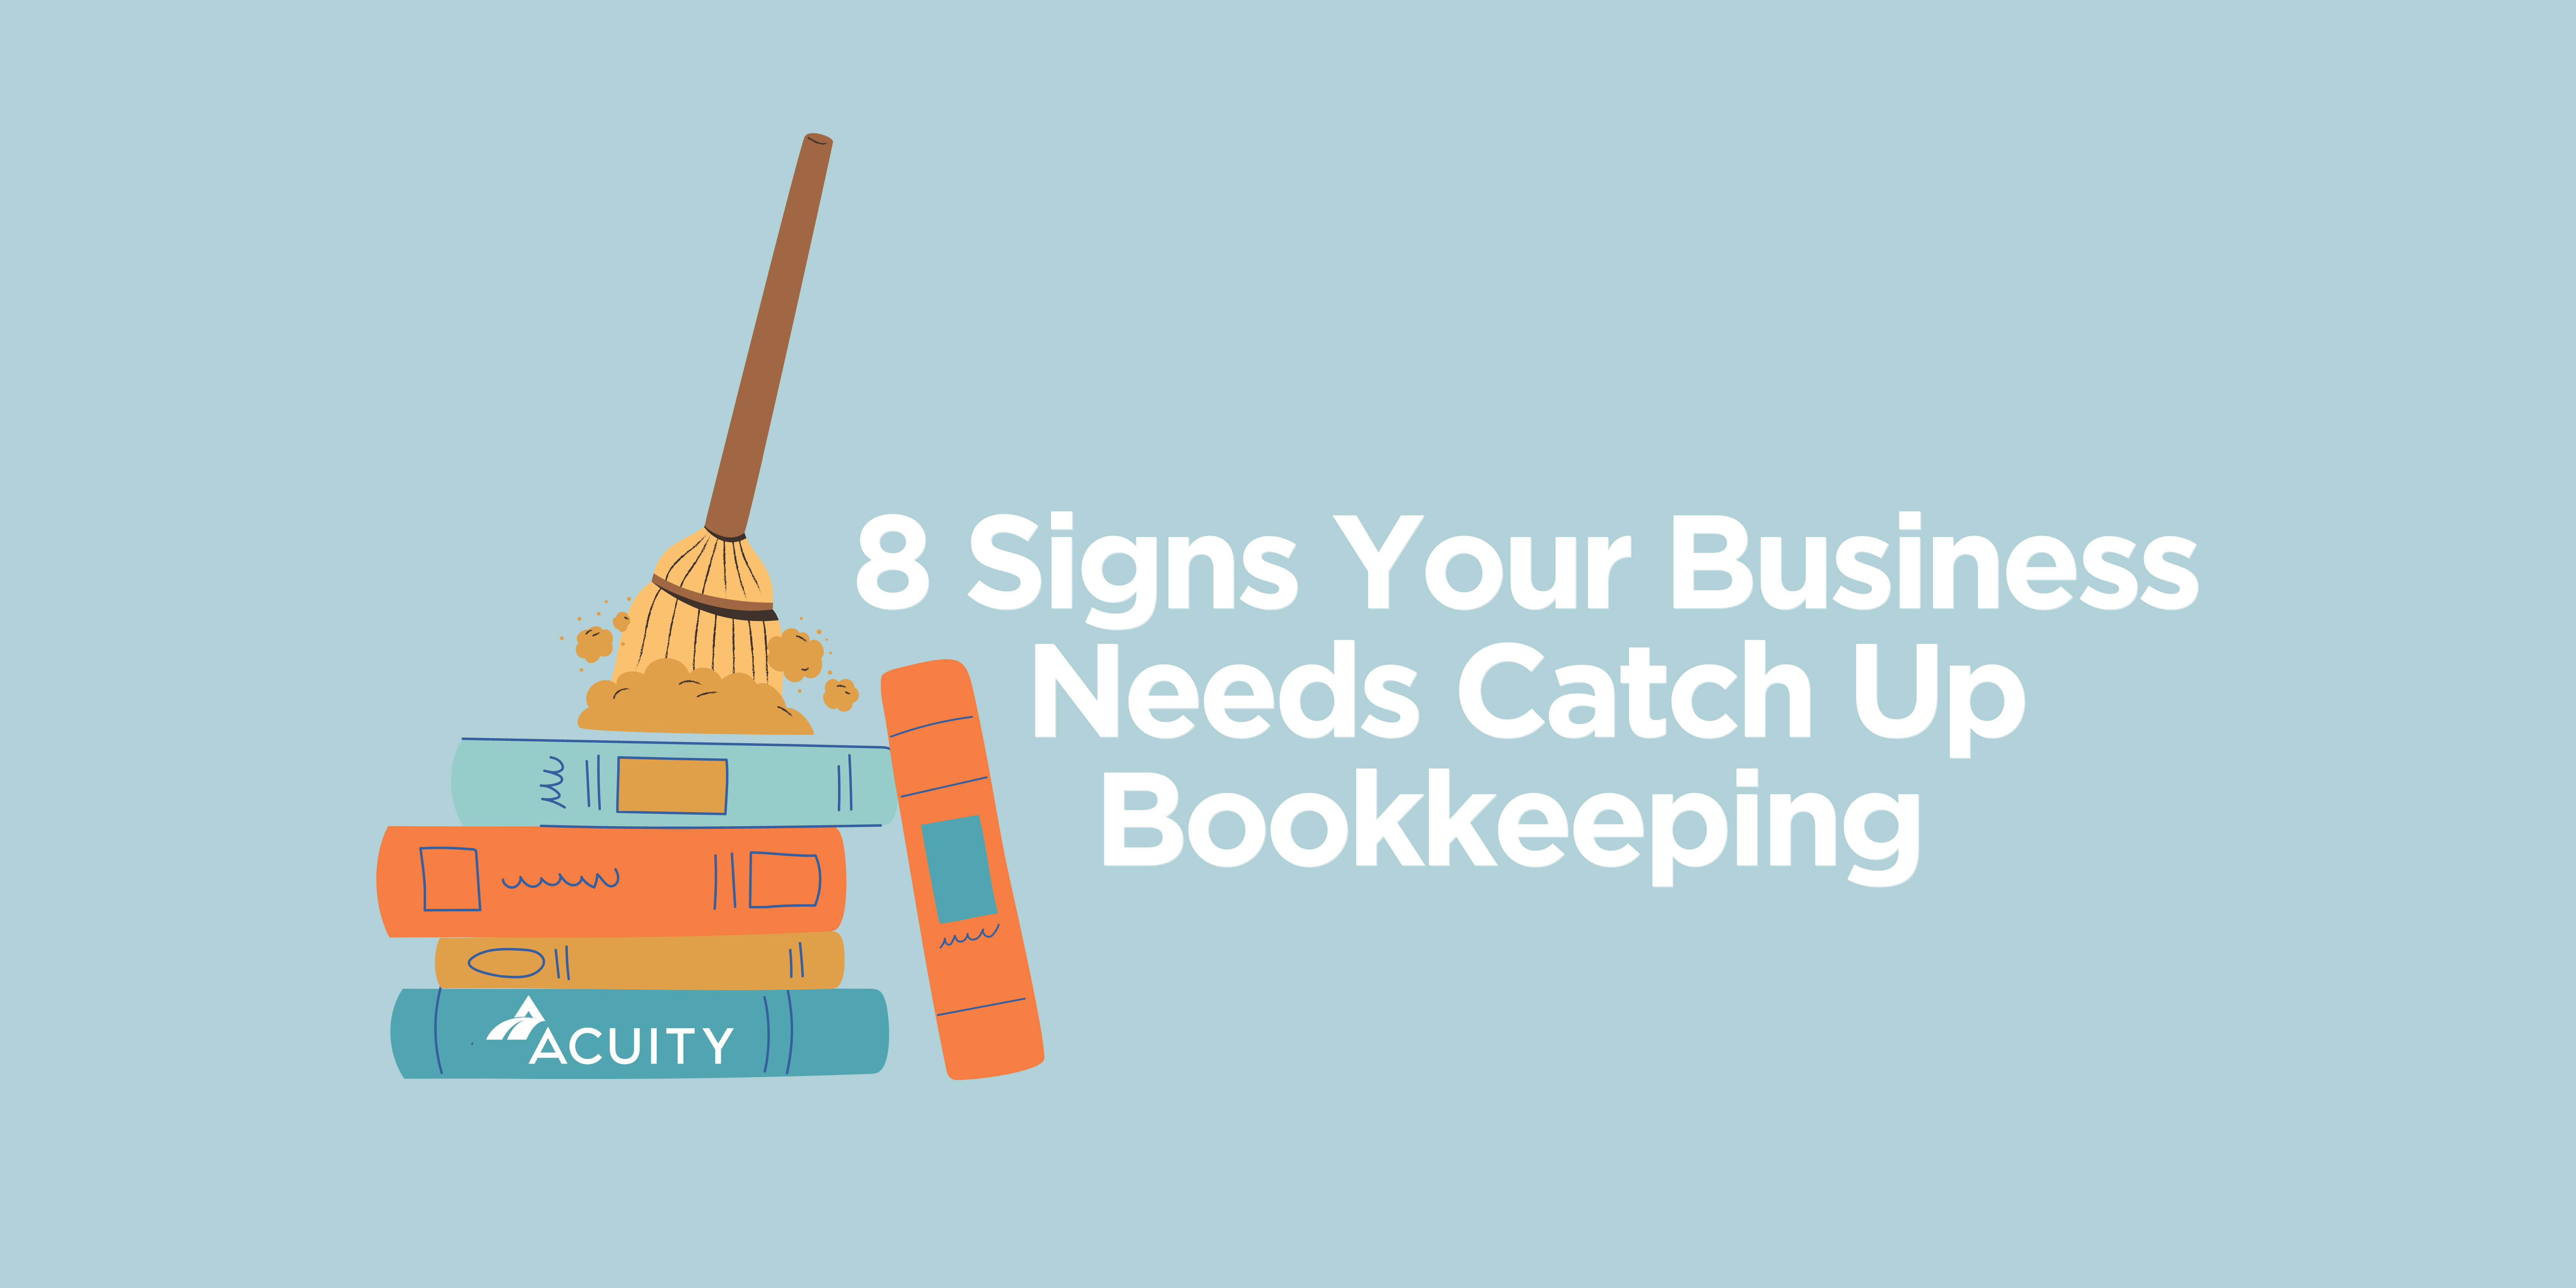 8 Signs You Need Catch Up Bookkeeping | An Entrepreneur’s Guide To Bookkeeping, Tax, & How They Interact